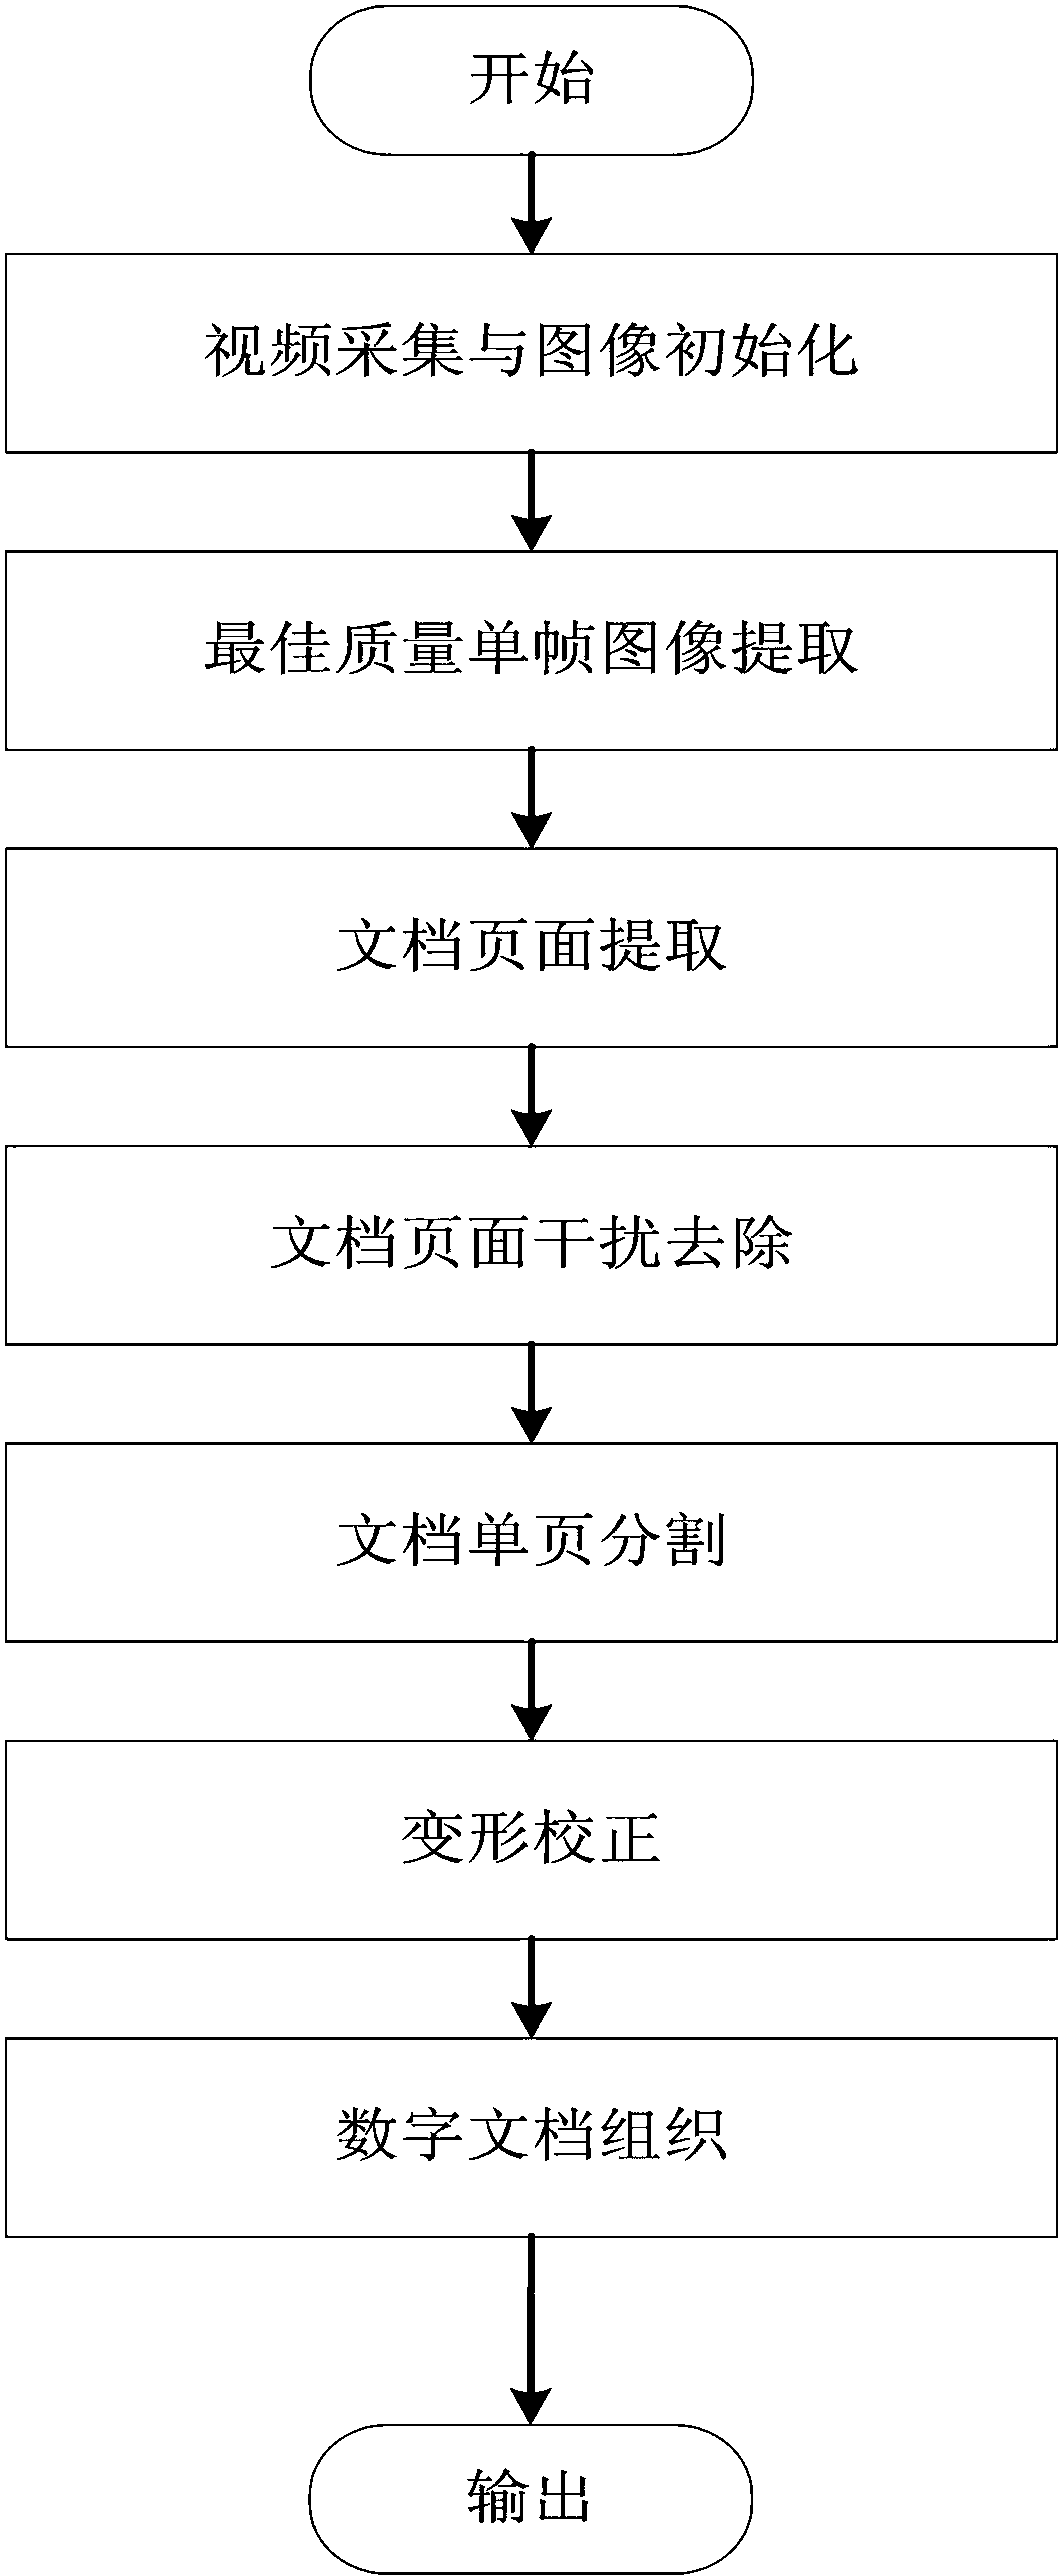 Continuous video image processing scanner and scanning method for paper documents